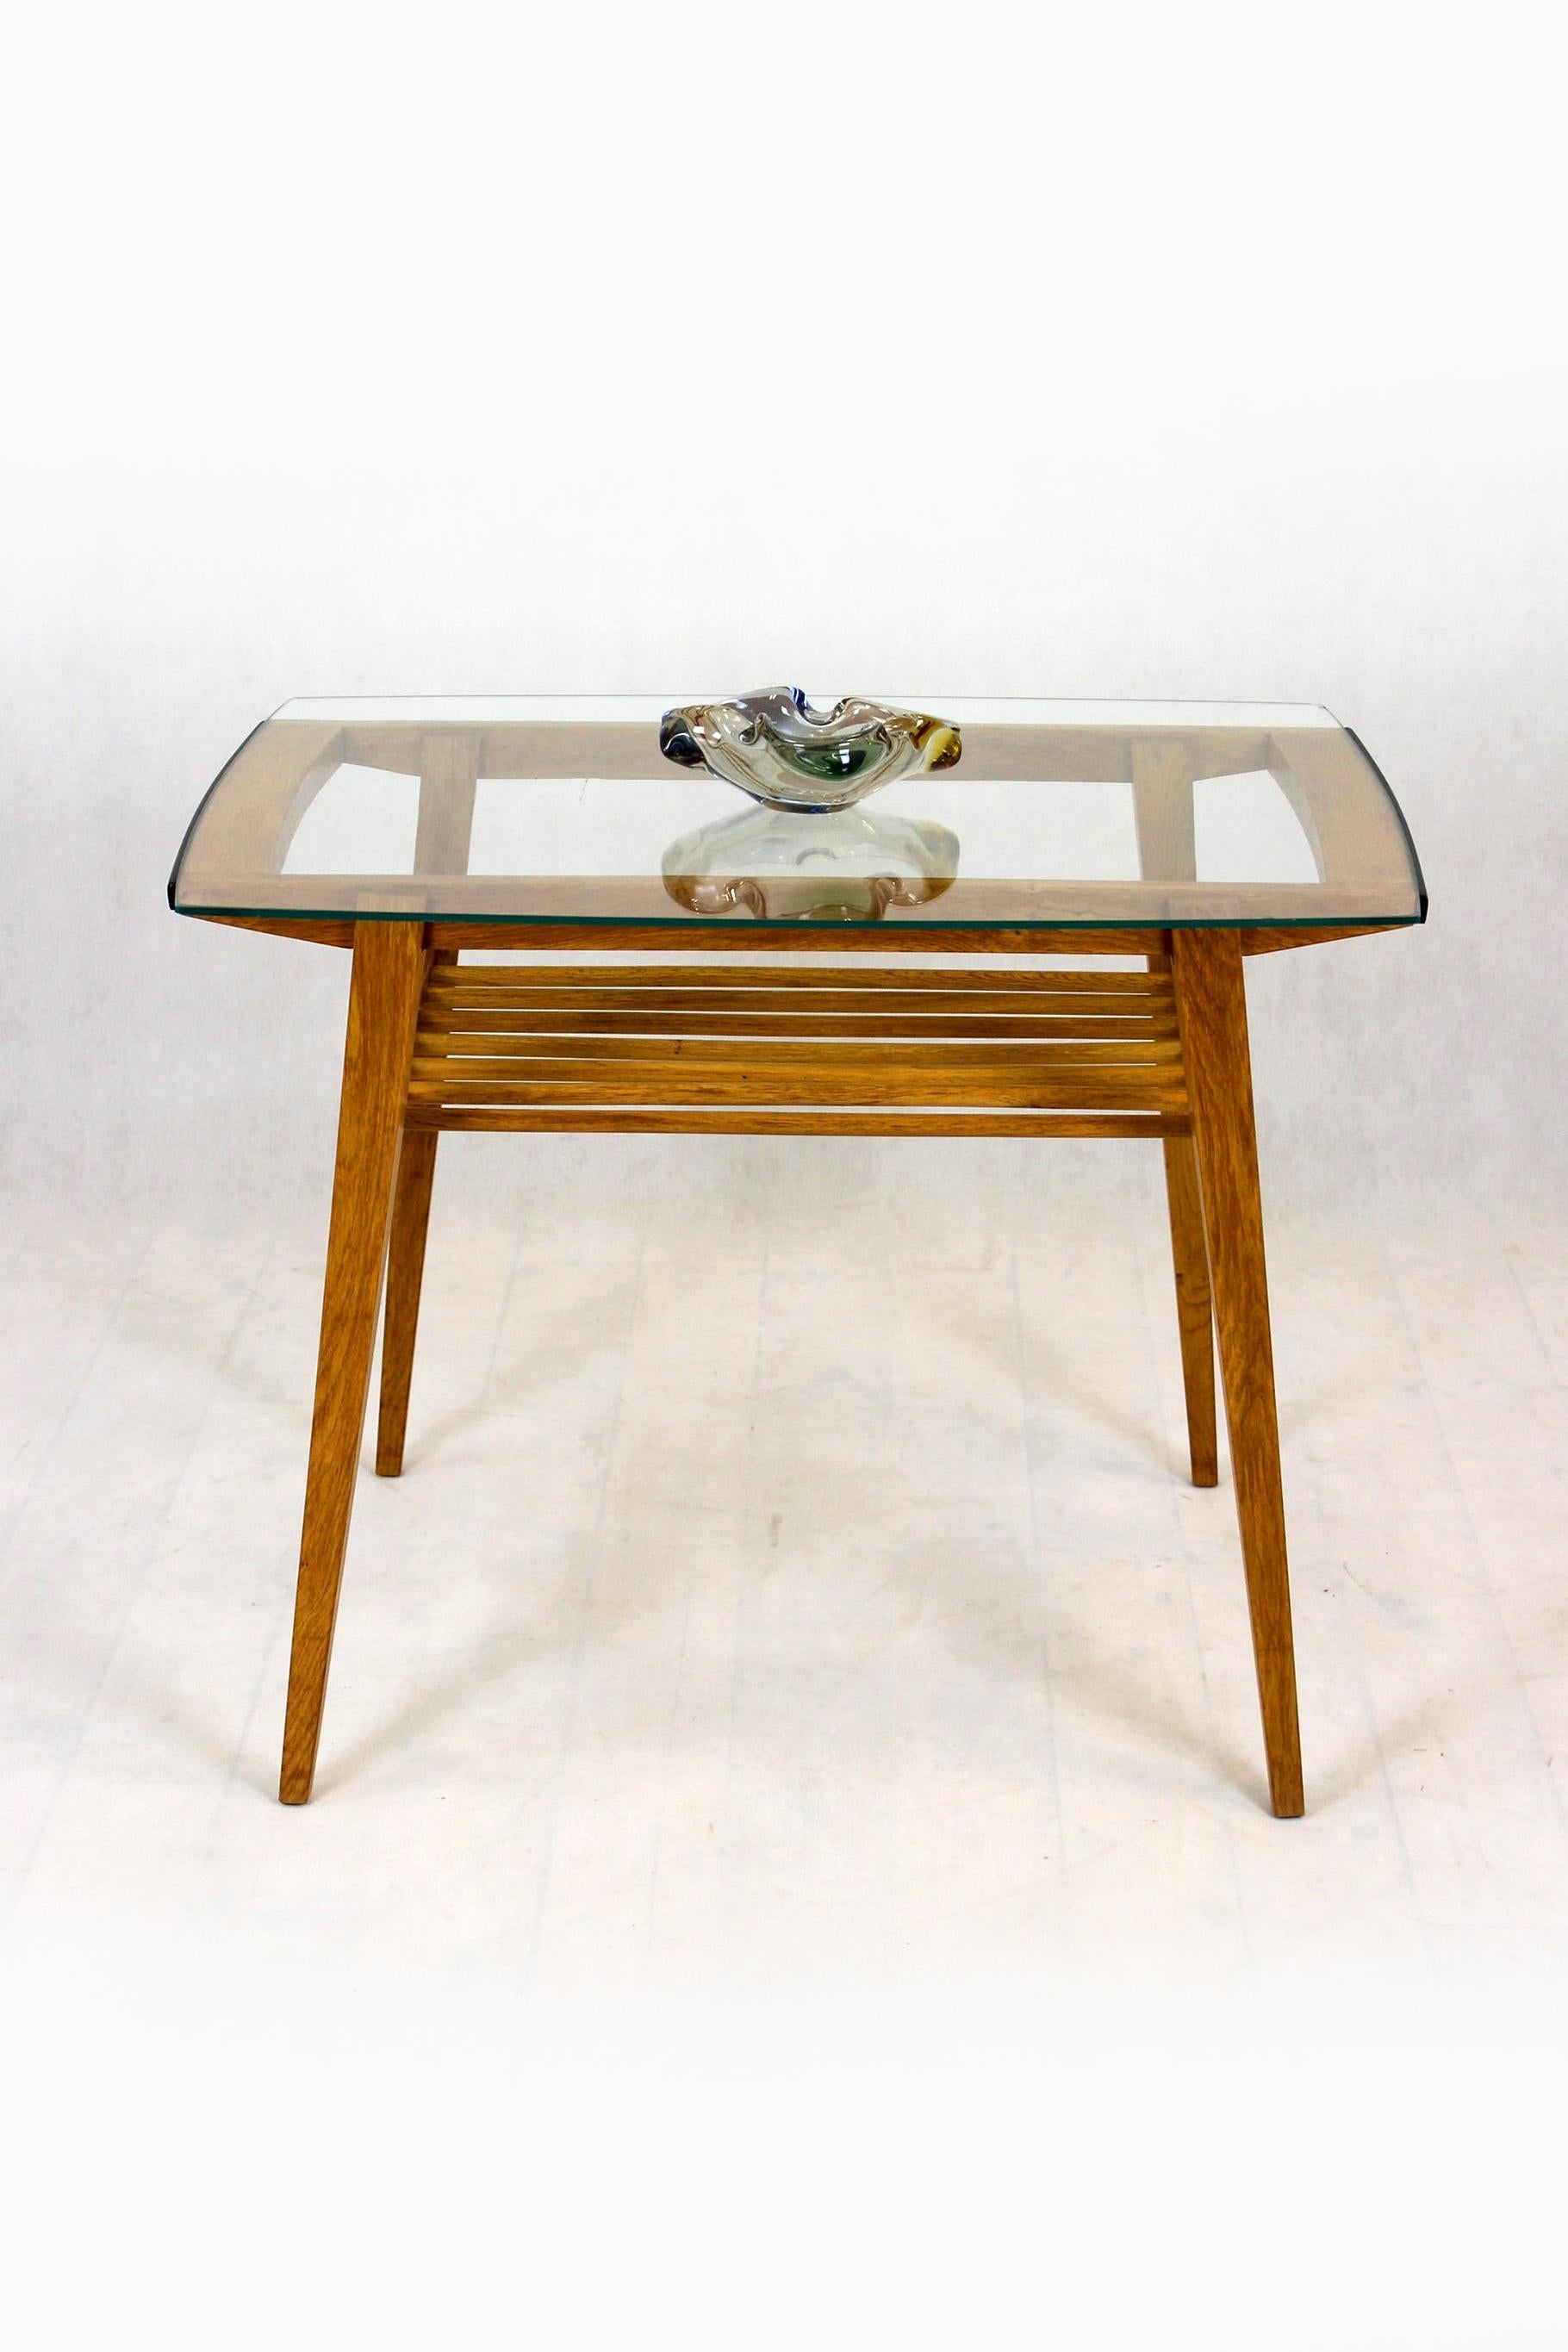 Mid-Century Modern Restored Wooden Coffee Table with Glass Top from Druzstvo, 1960s For Sale